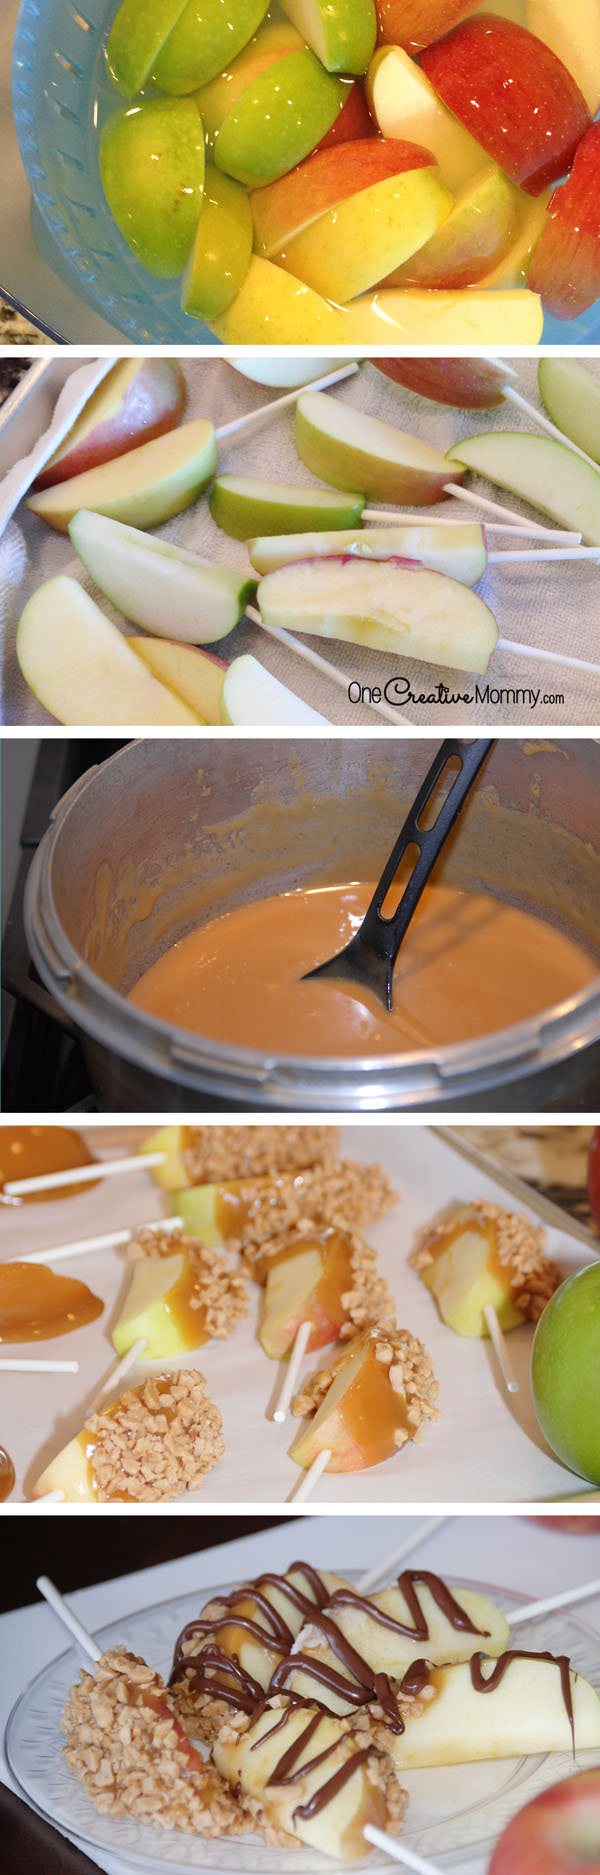 Easy steps for making Caramel Apple Pops {OneCreativeMommy.com} Caramel candy recipe included.  Everything is more fun on a stick!